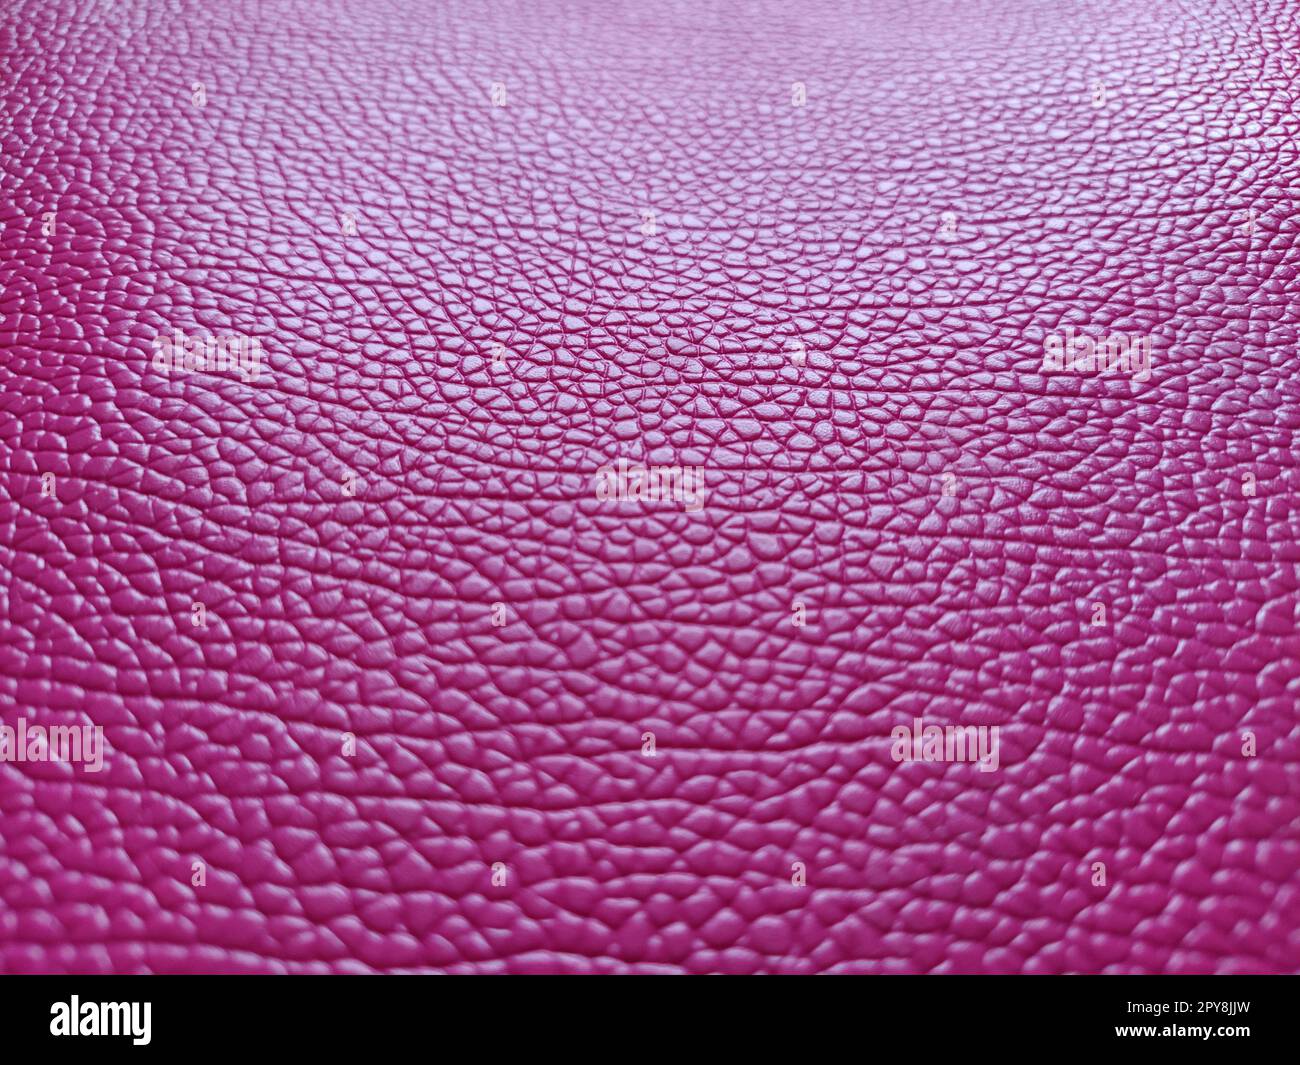 Artificial leather is bright pink or fuchsia. Distinct furrows and elevations on the surface of a bag or shoe. Reflection of the light. Fashion accessory made of imitation pig skin. Close-up Stock Photo